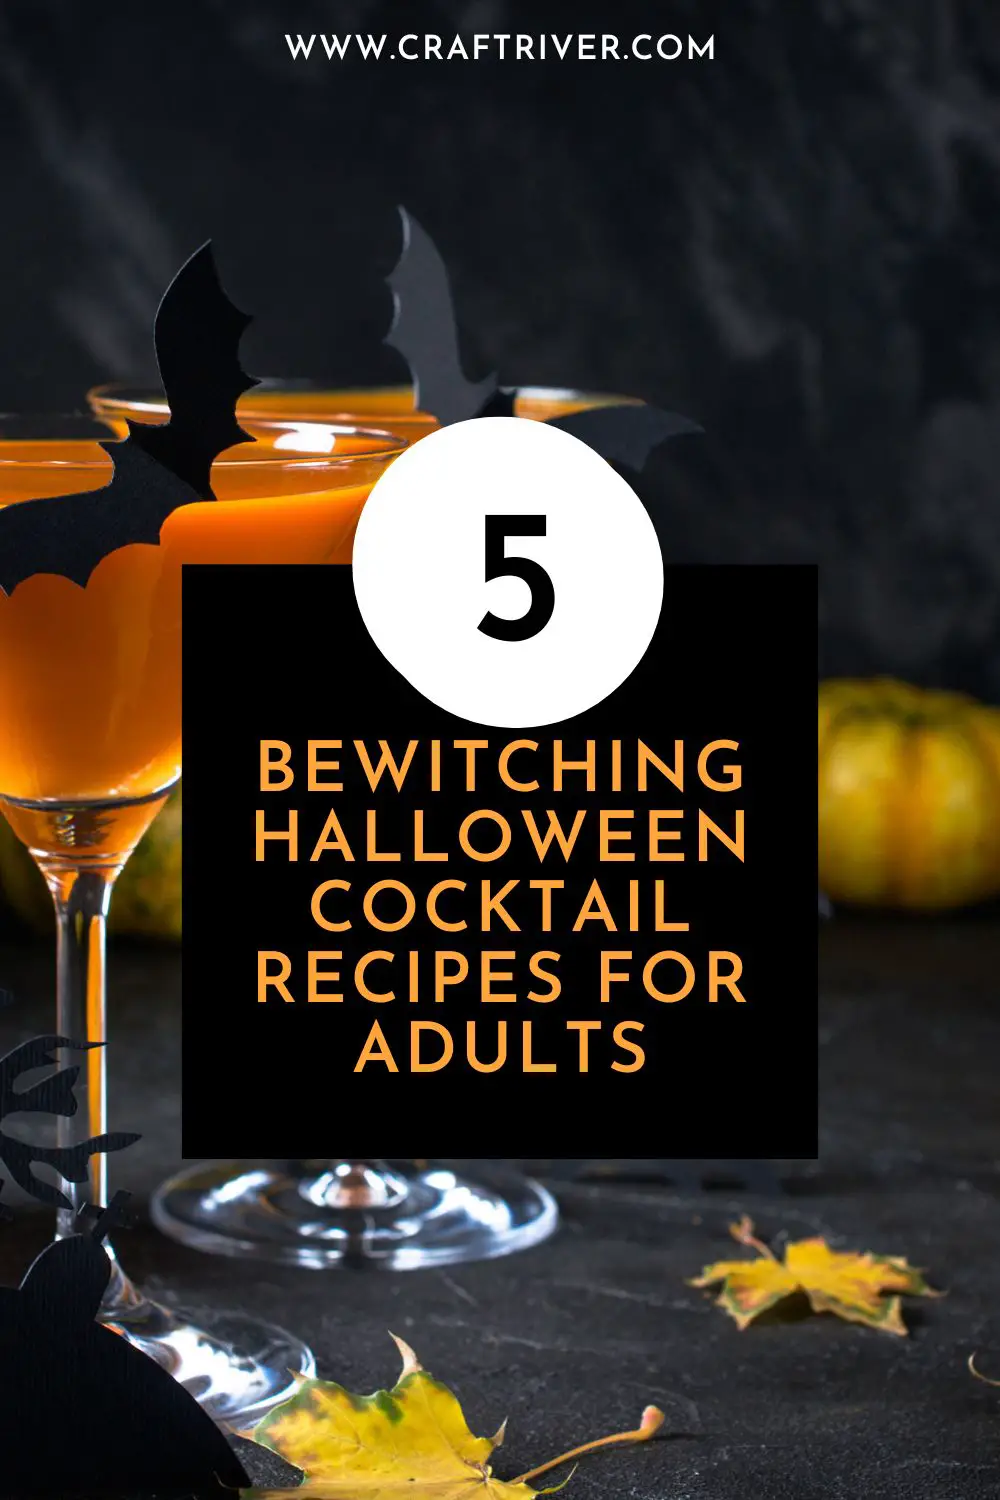 Bewitching Halloween Cocktail Recipes for Adults